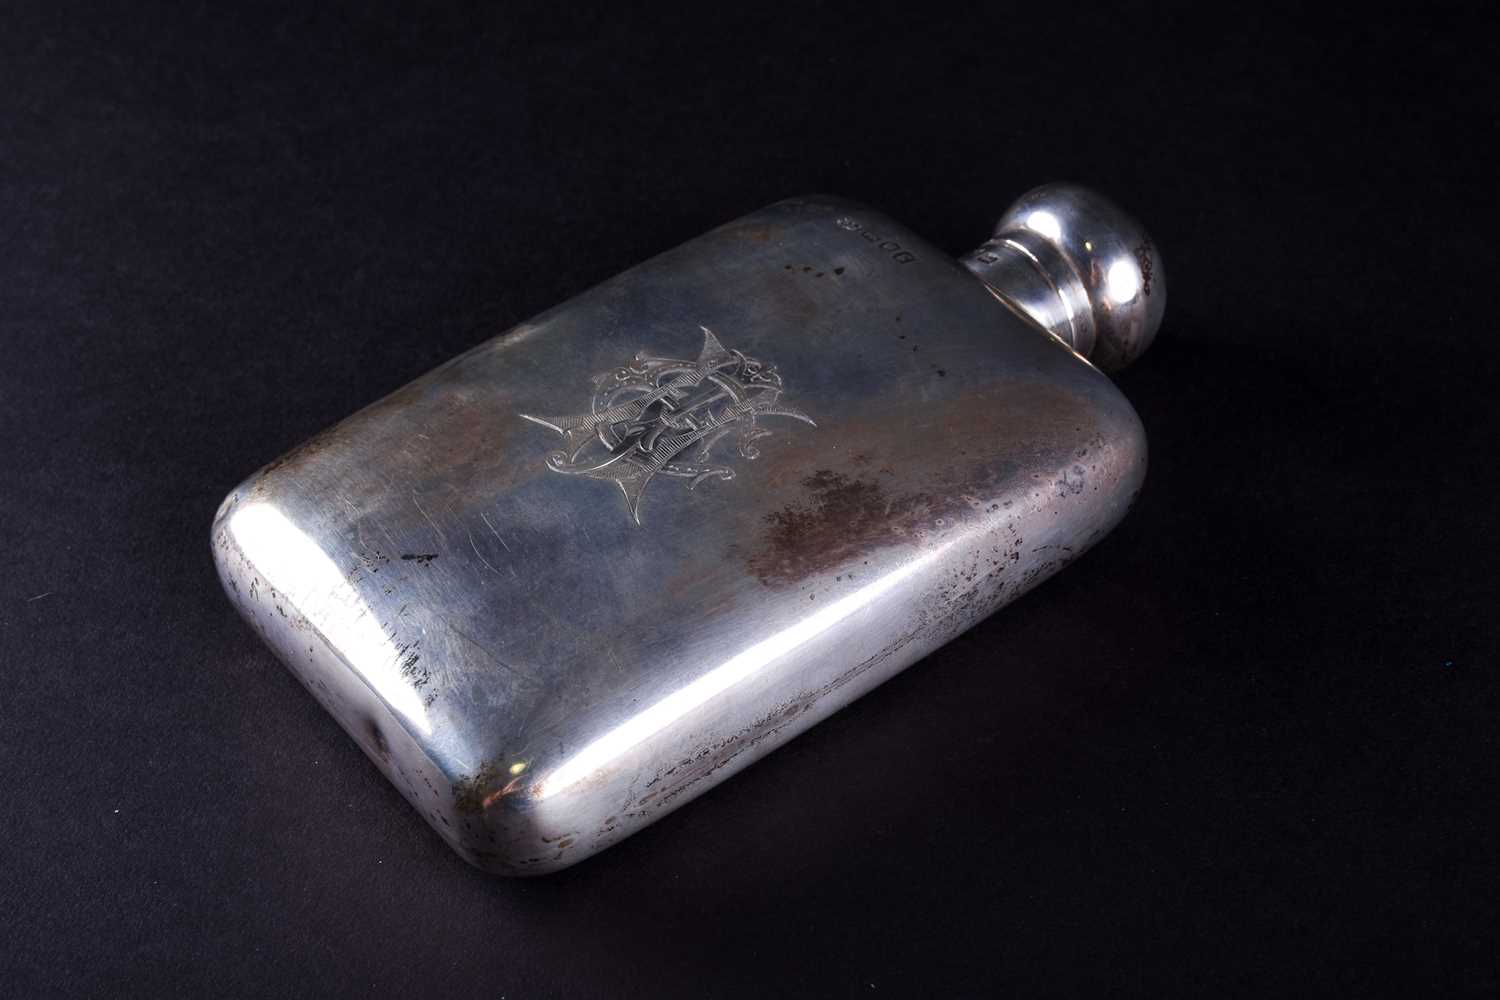 An Edwardian silver hip flask, Robert Pringle & Sons, London 1902, engraved with monogram IEH, 170g, - Image 2 of 6